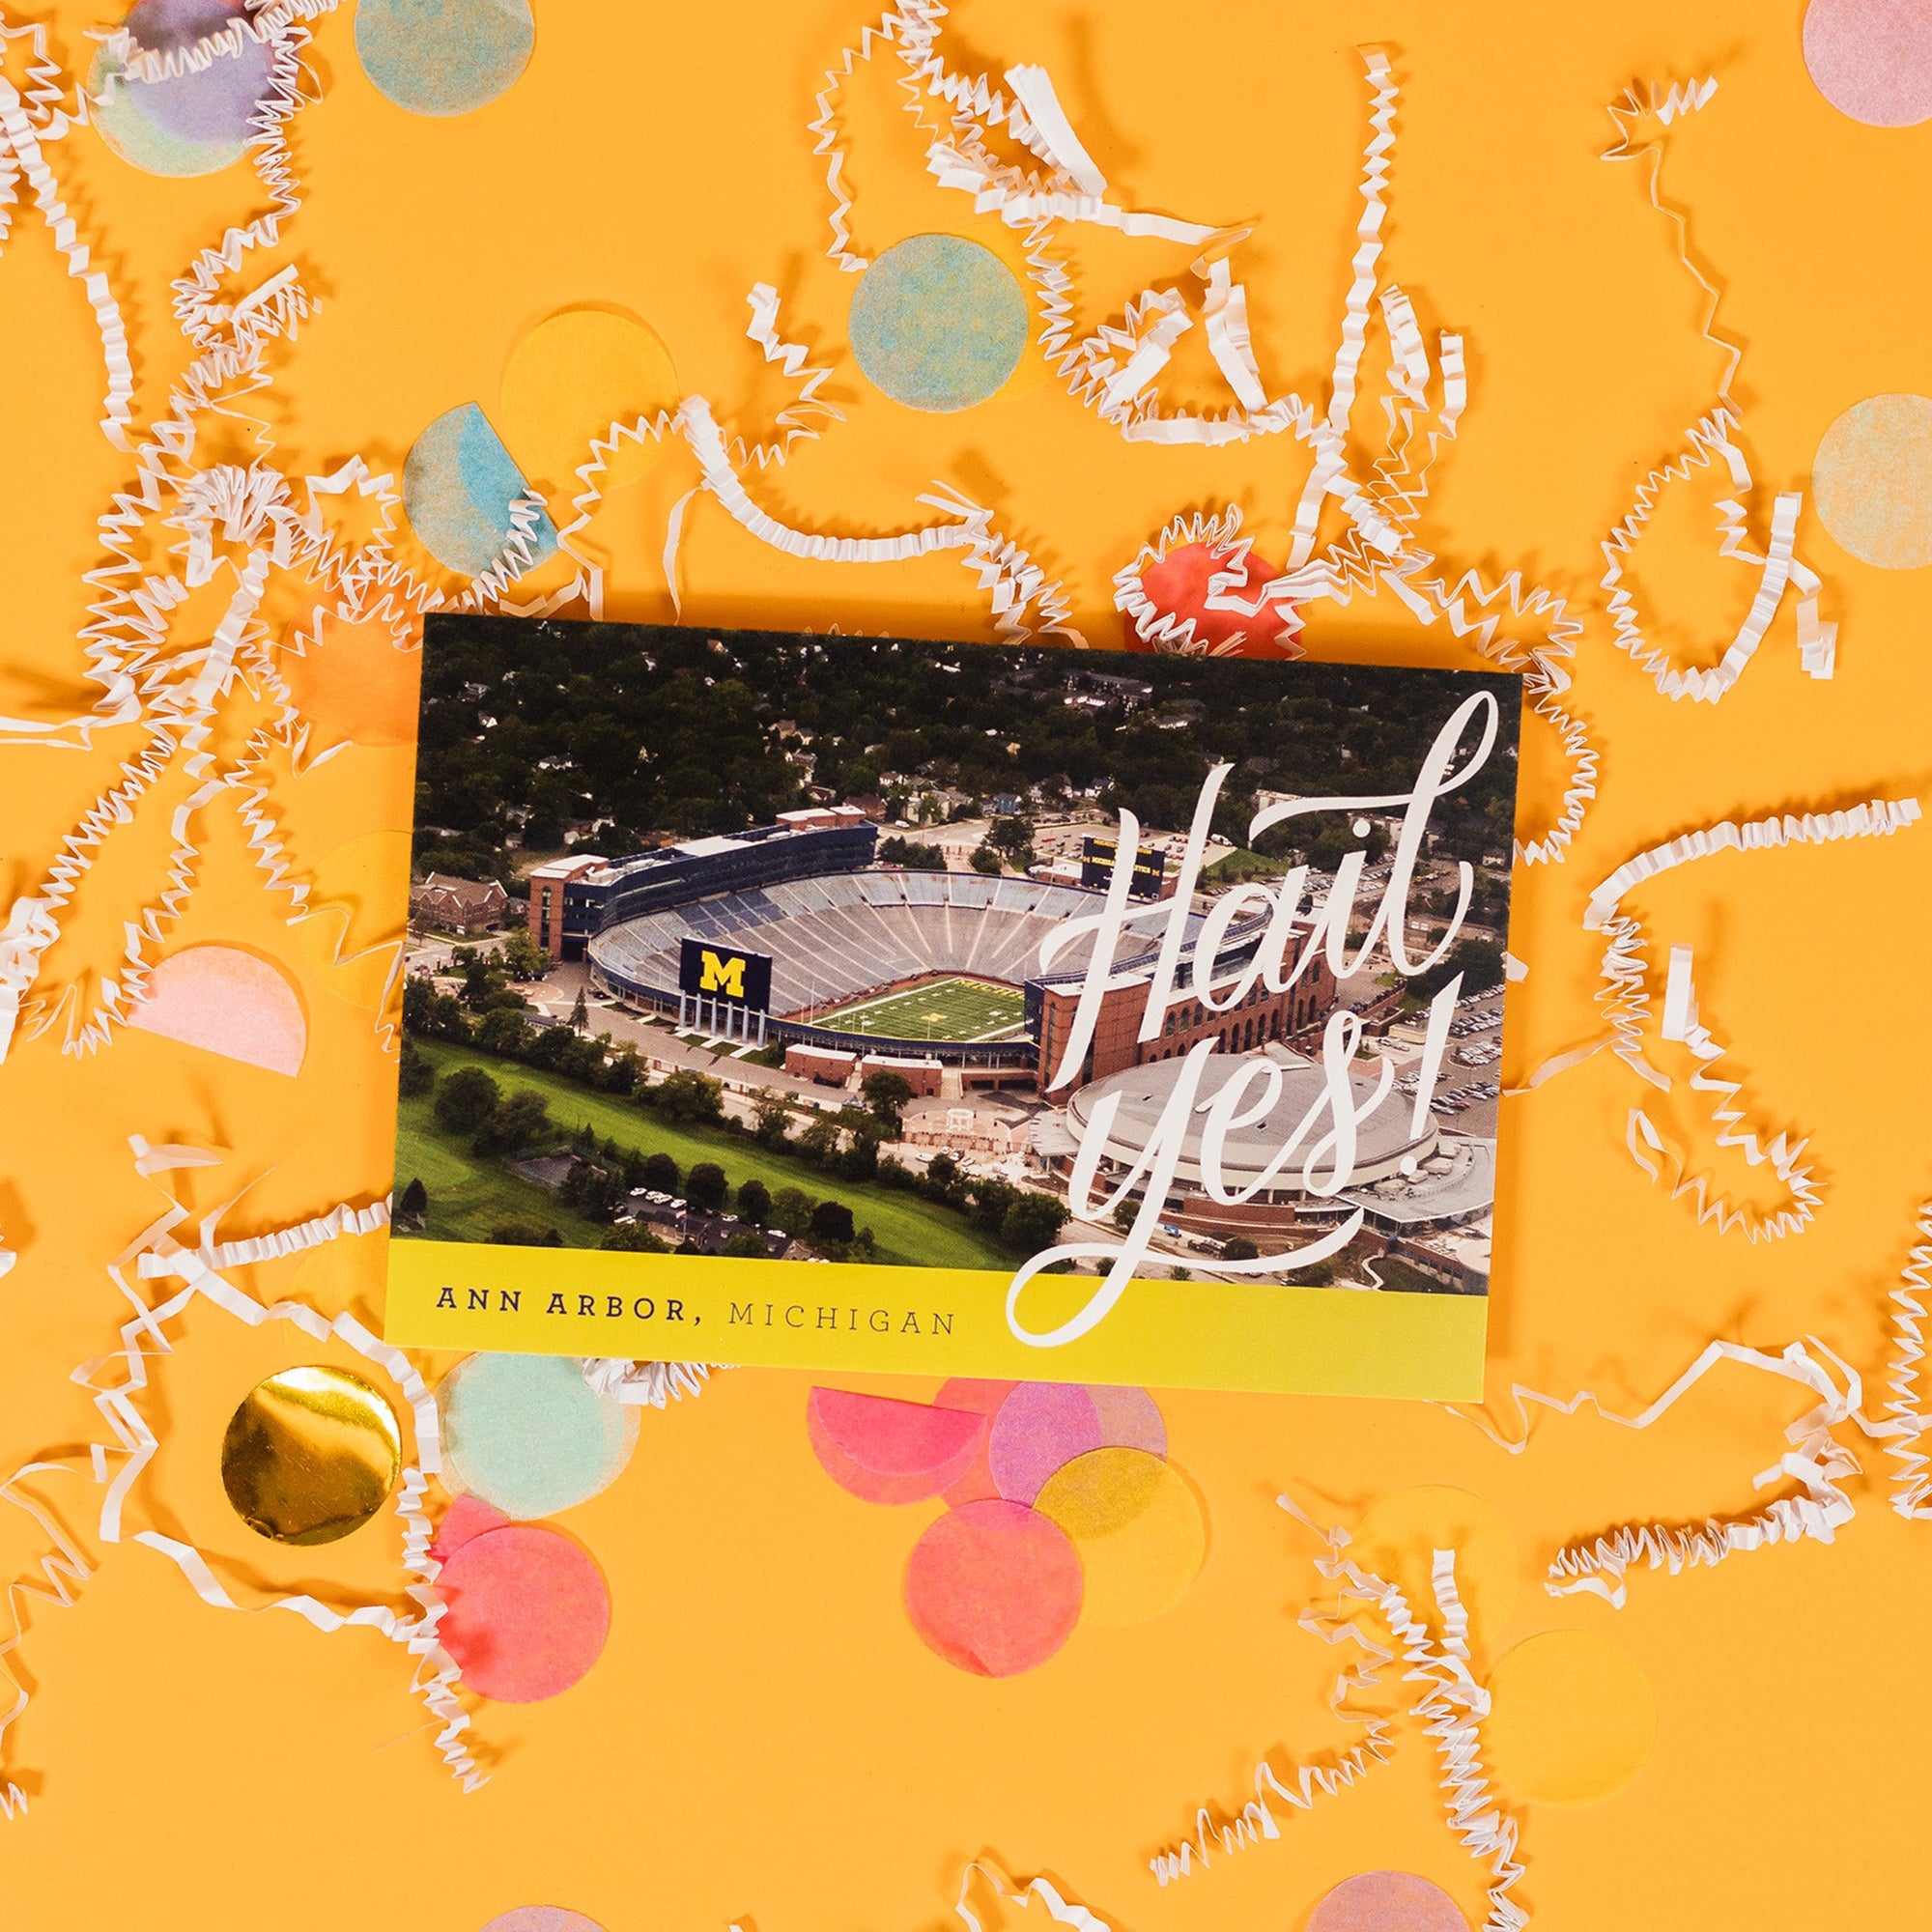 On a sunny mustard background sits a postcard with white crinkle and big, colorful confetti scattered around. This postcard has a picture of The Big House stadium with a yellow stripe at the bottom. It says in white hand-lettering "Hail Yes!" and in the yellow stripe it says "ANN ARBOR, MICHIGAN."